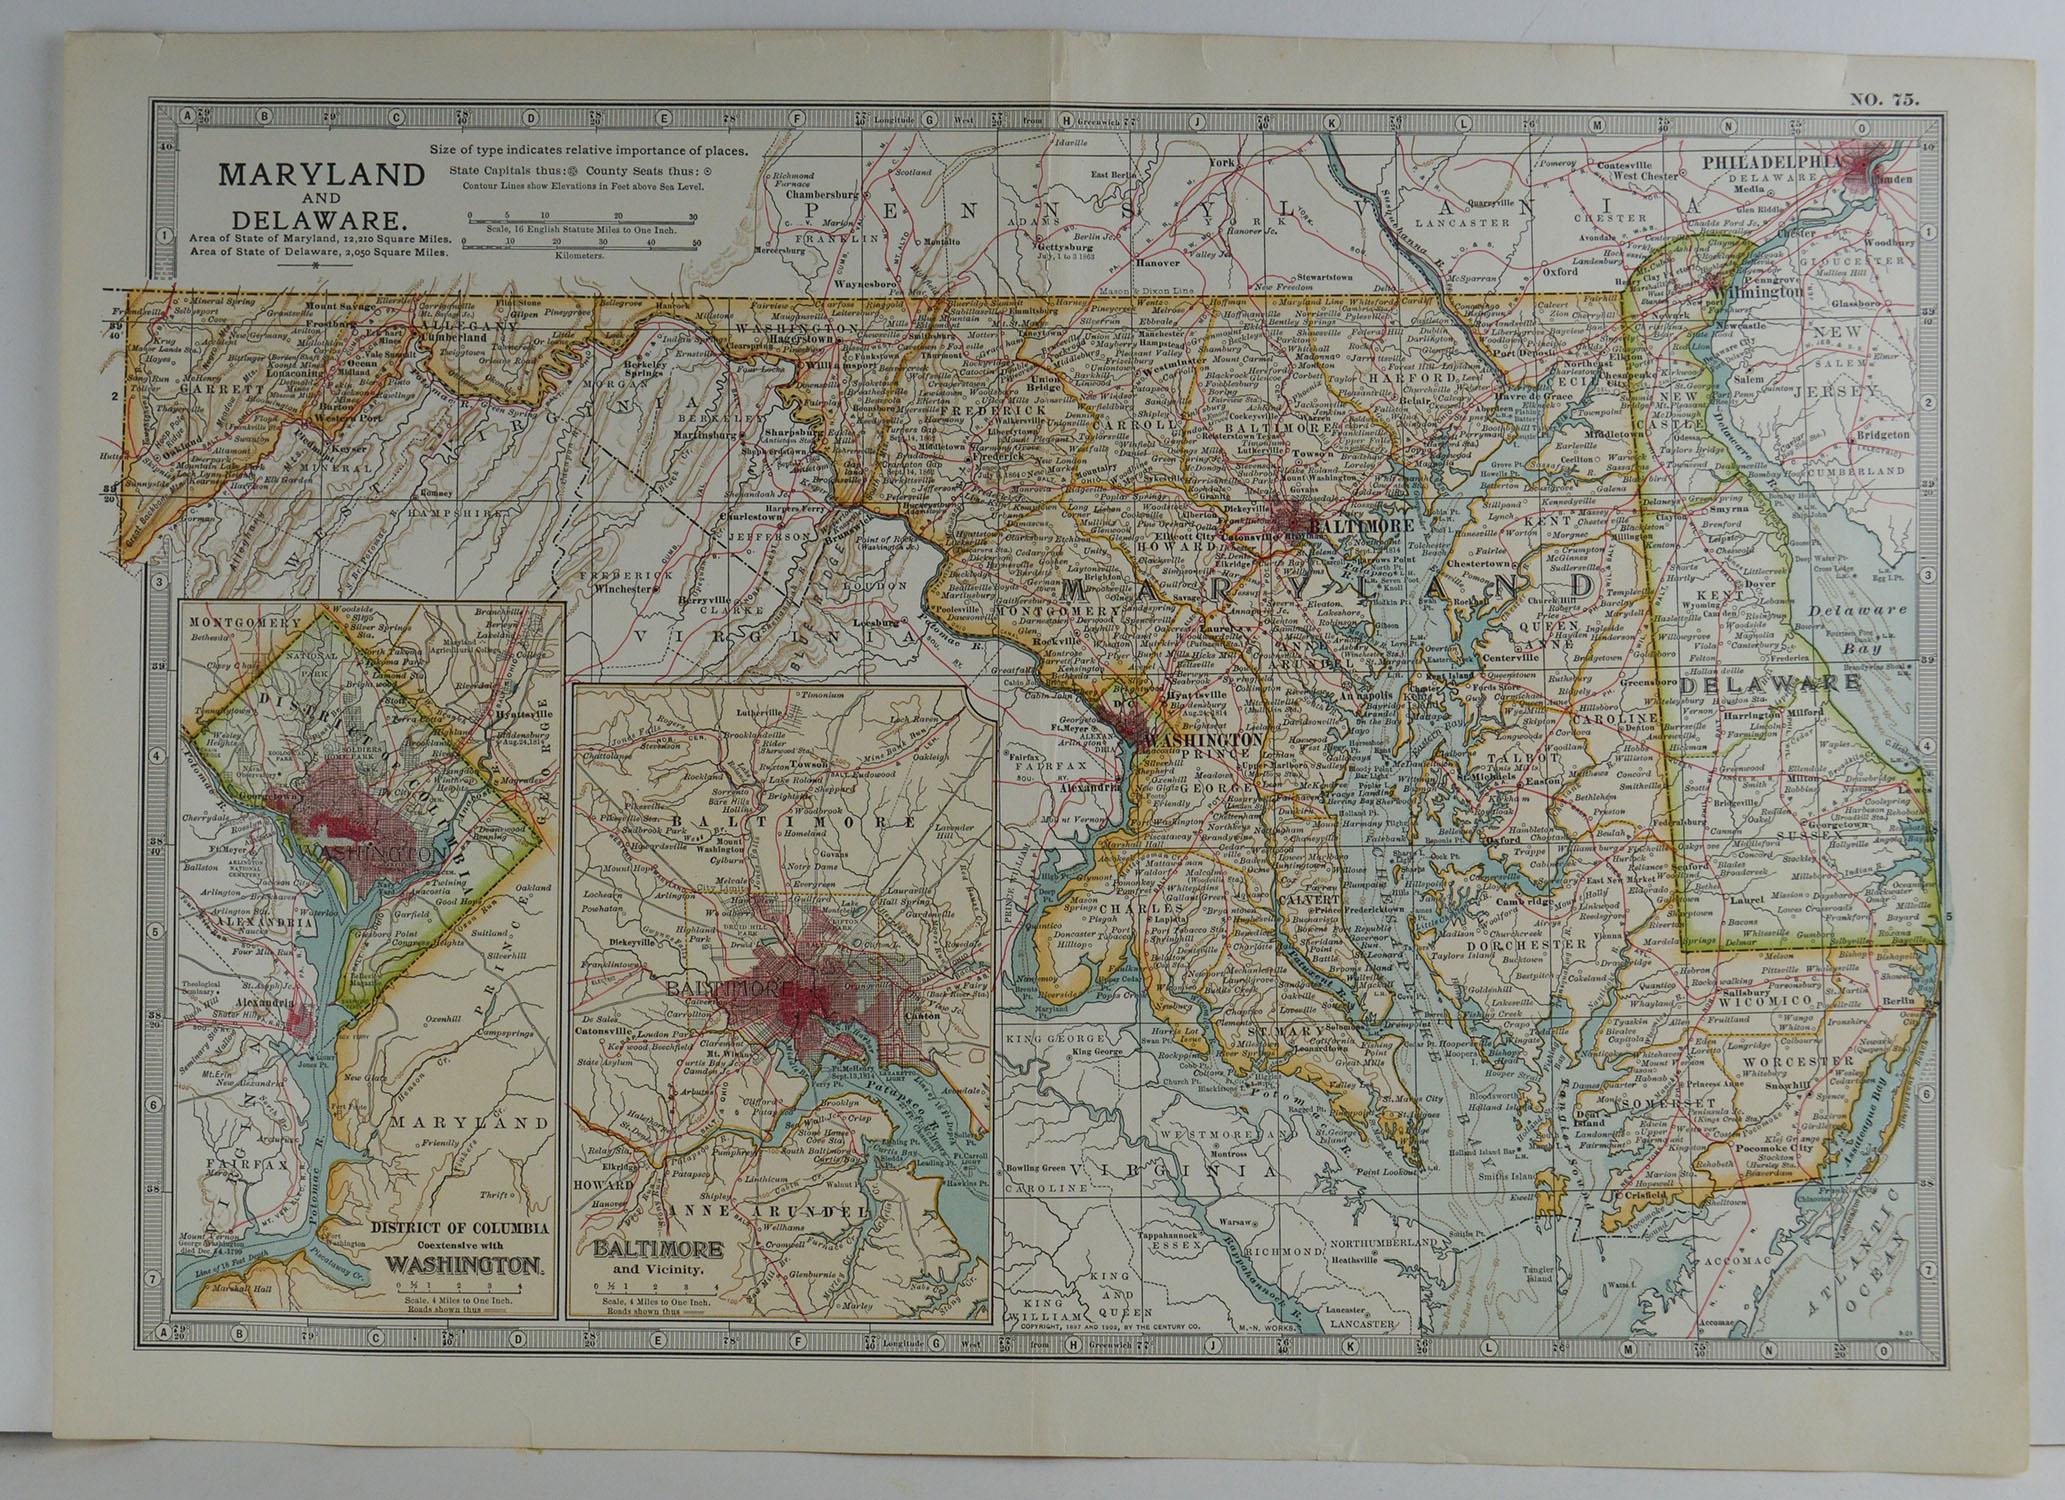 Great map of Maryland & Delaware

Original color.

Published, circa 1890

A couple of minor edge tears

Unframed.
   